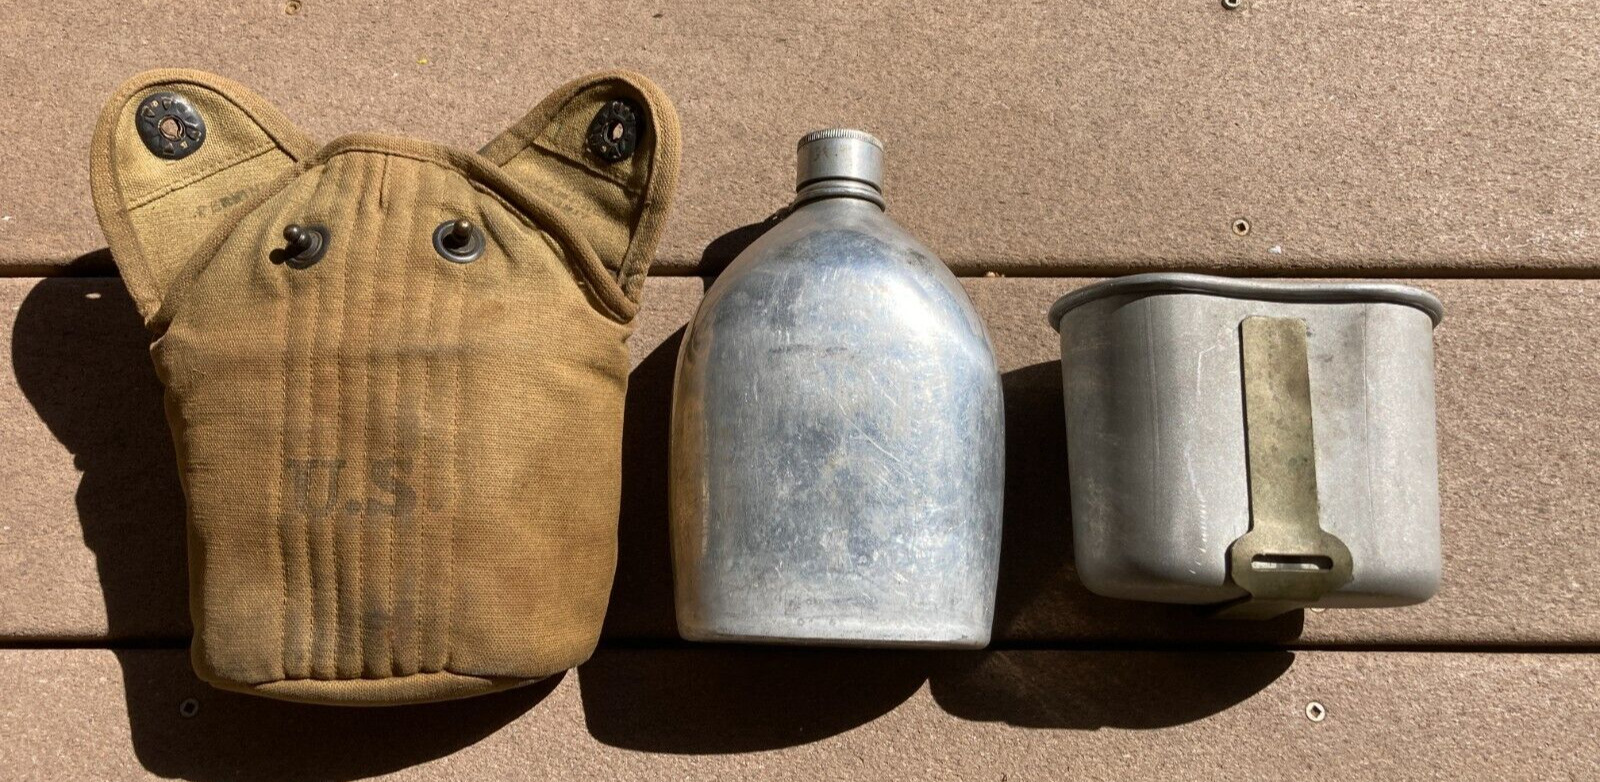 WW1 M1910 US ARMY MILITARY SPUN Canteen + Cup + Cover FIELD GEAR